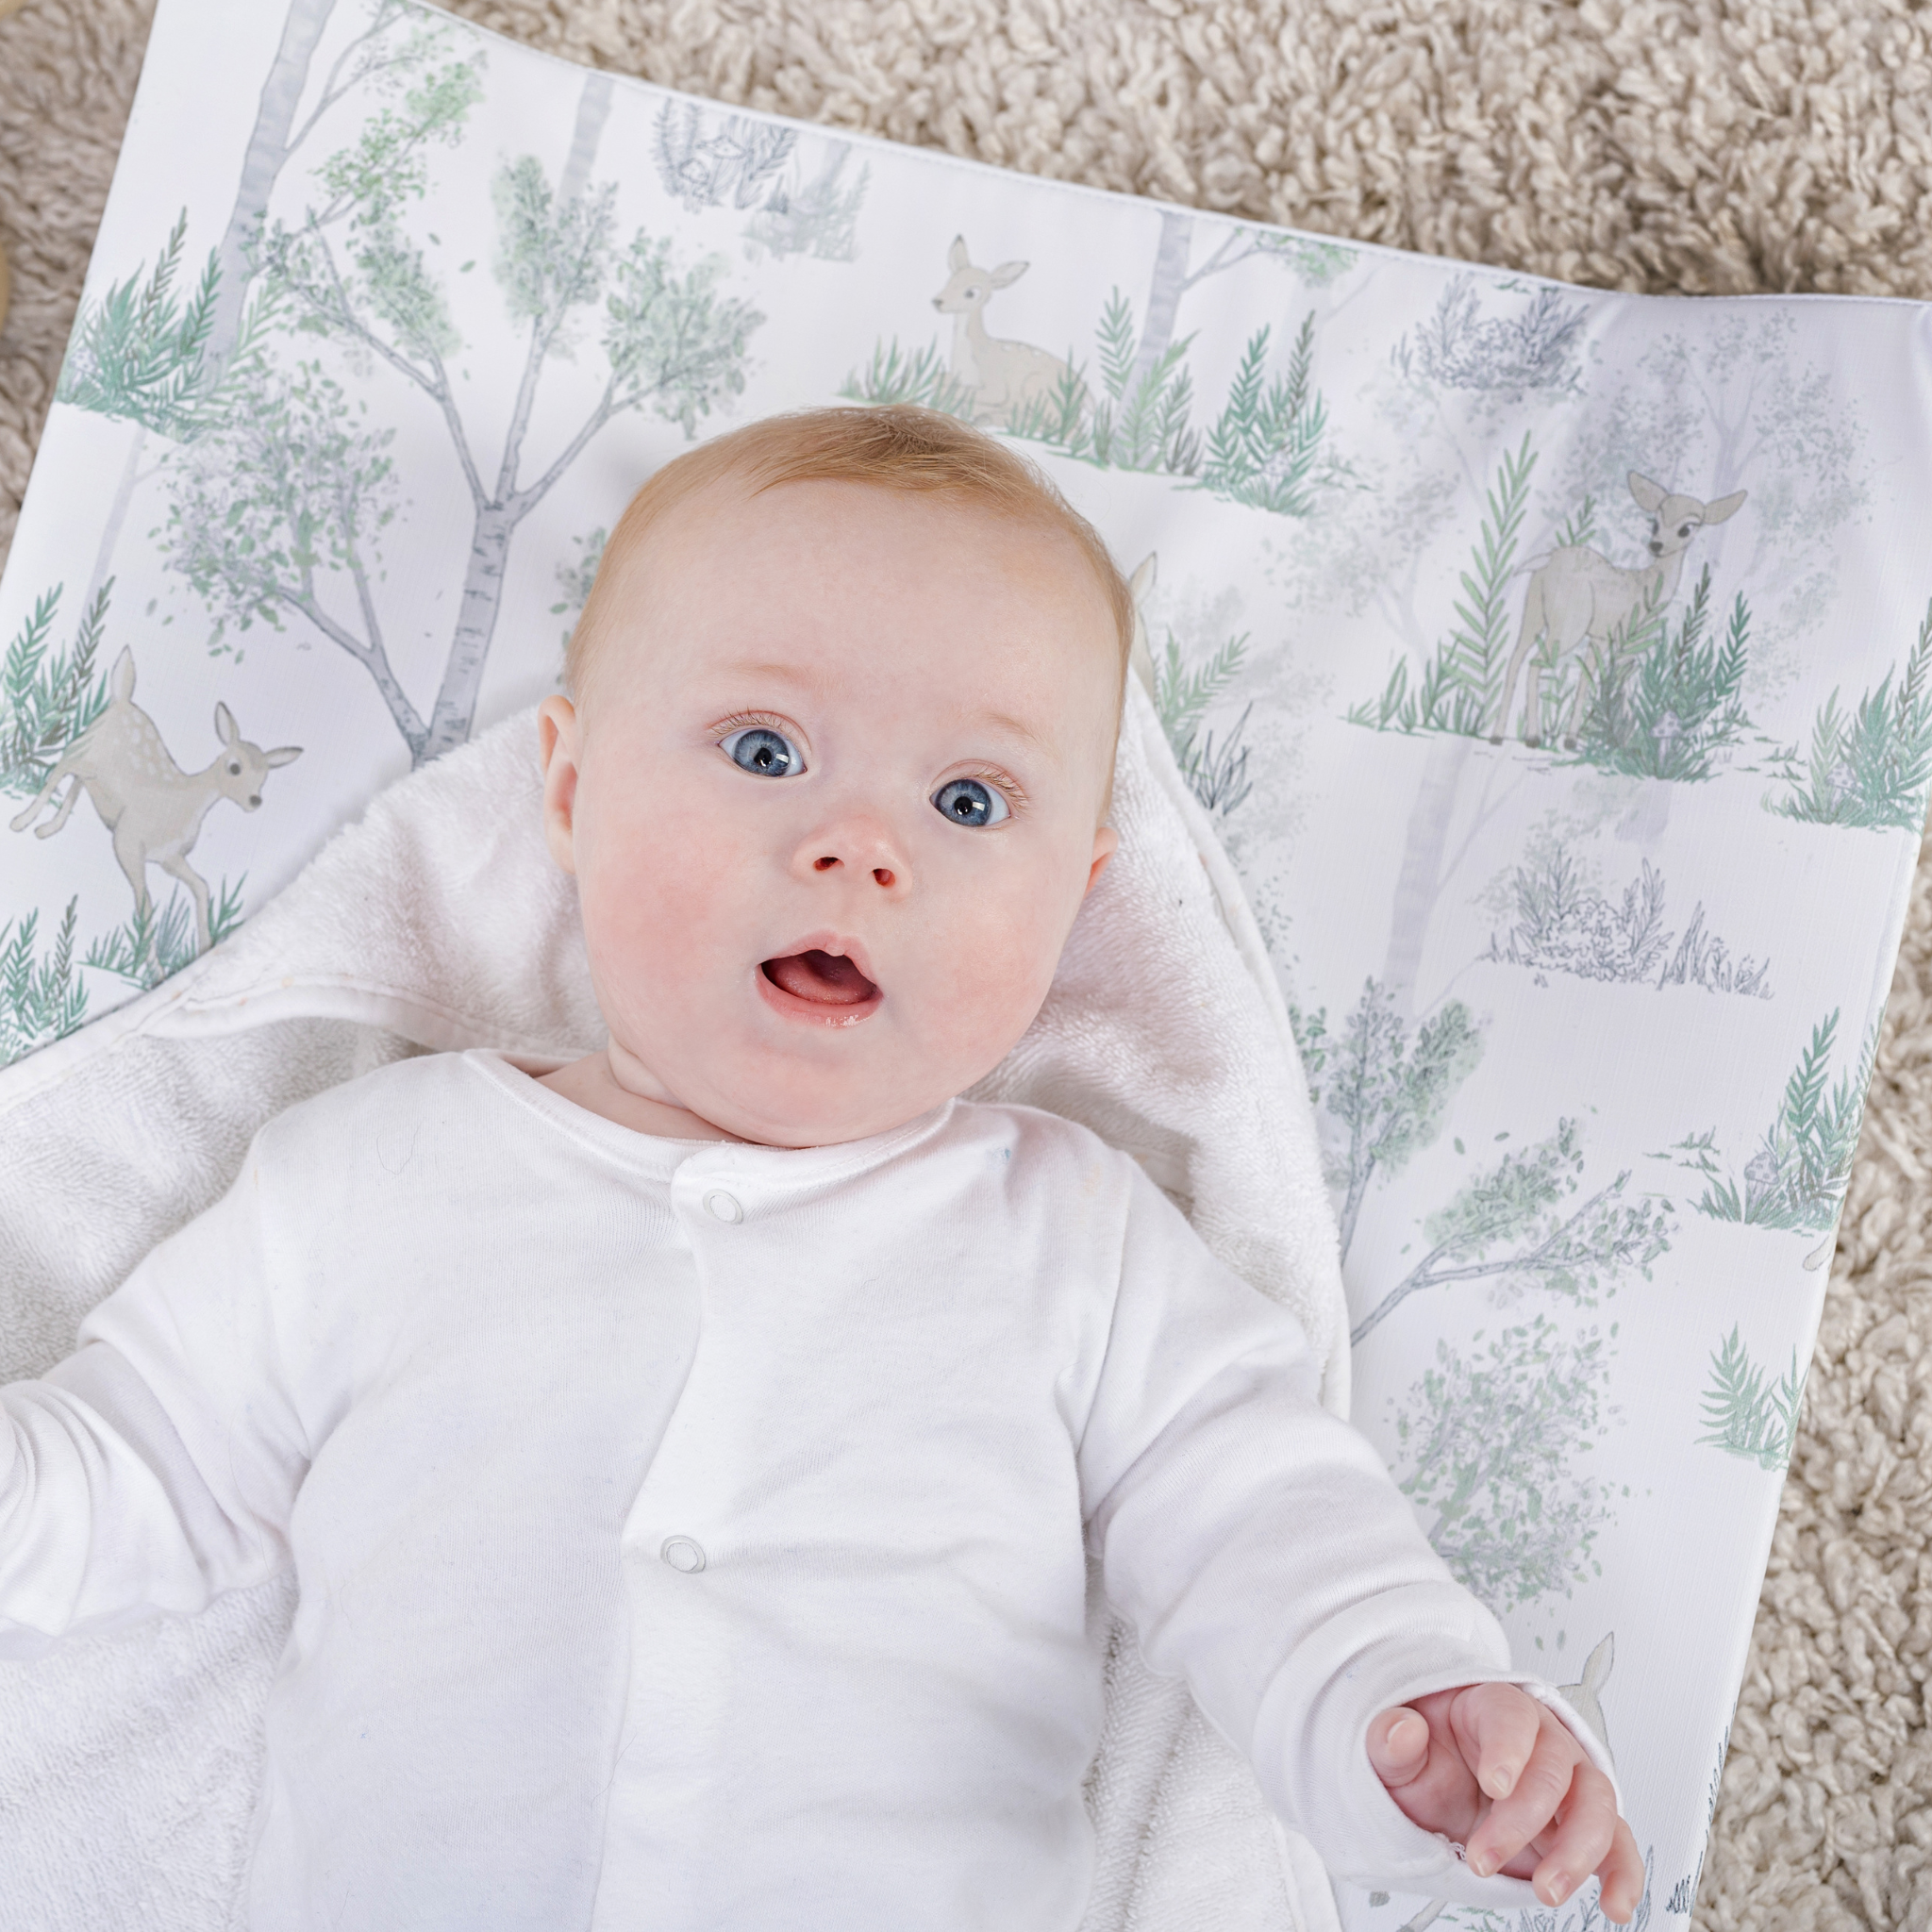 PVC Care Guide - Top Tips On How To Care For & Clean Your Baby Changing Mat